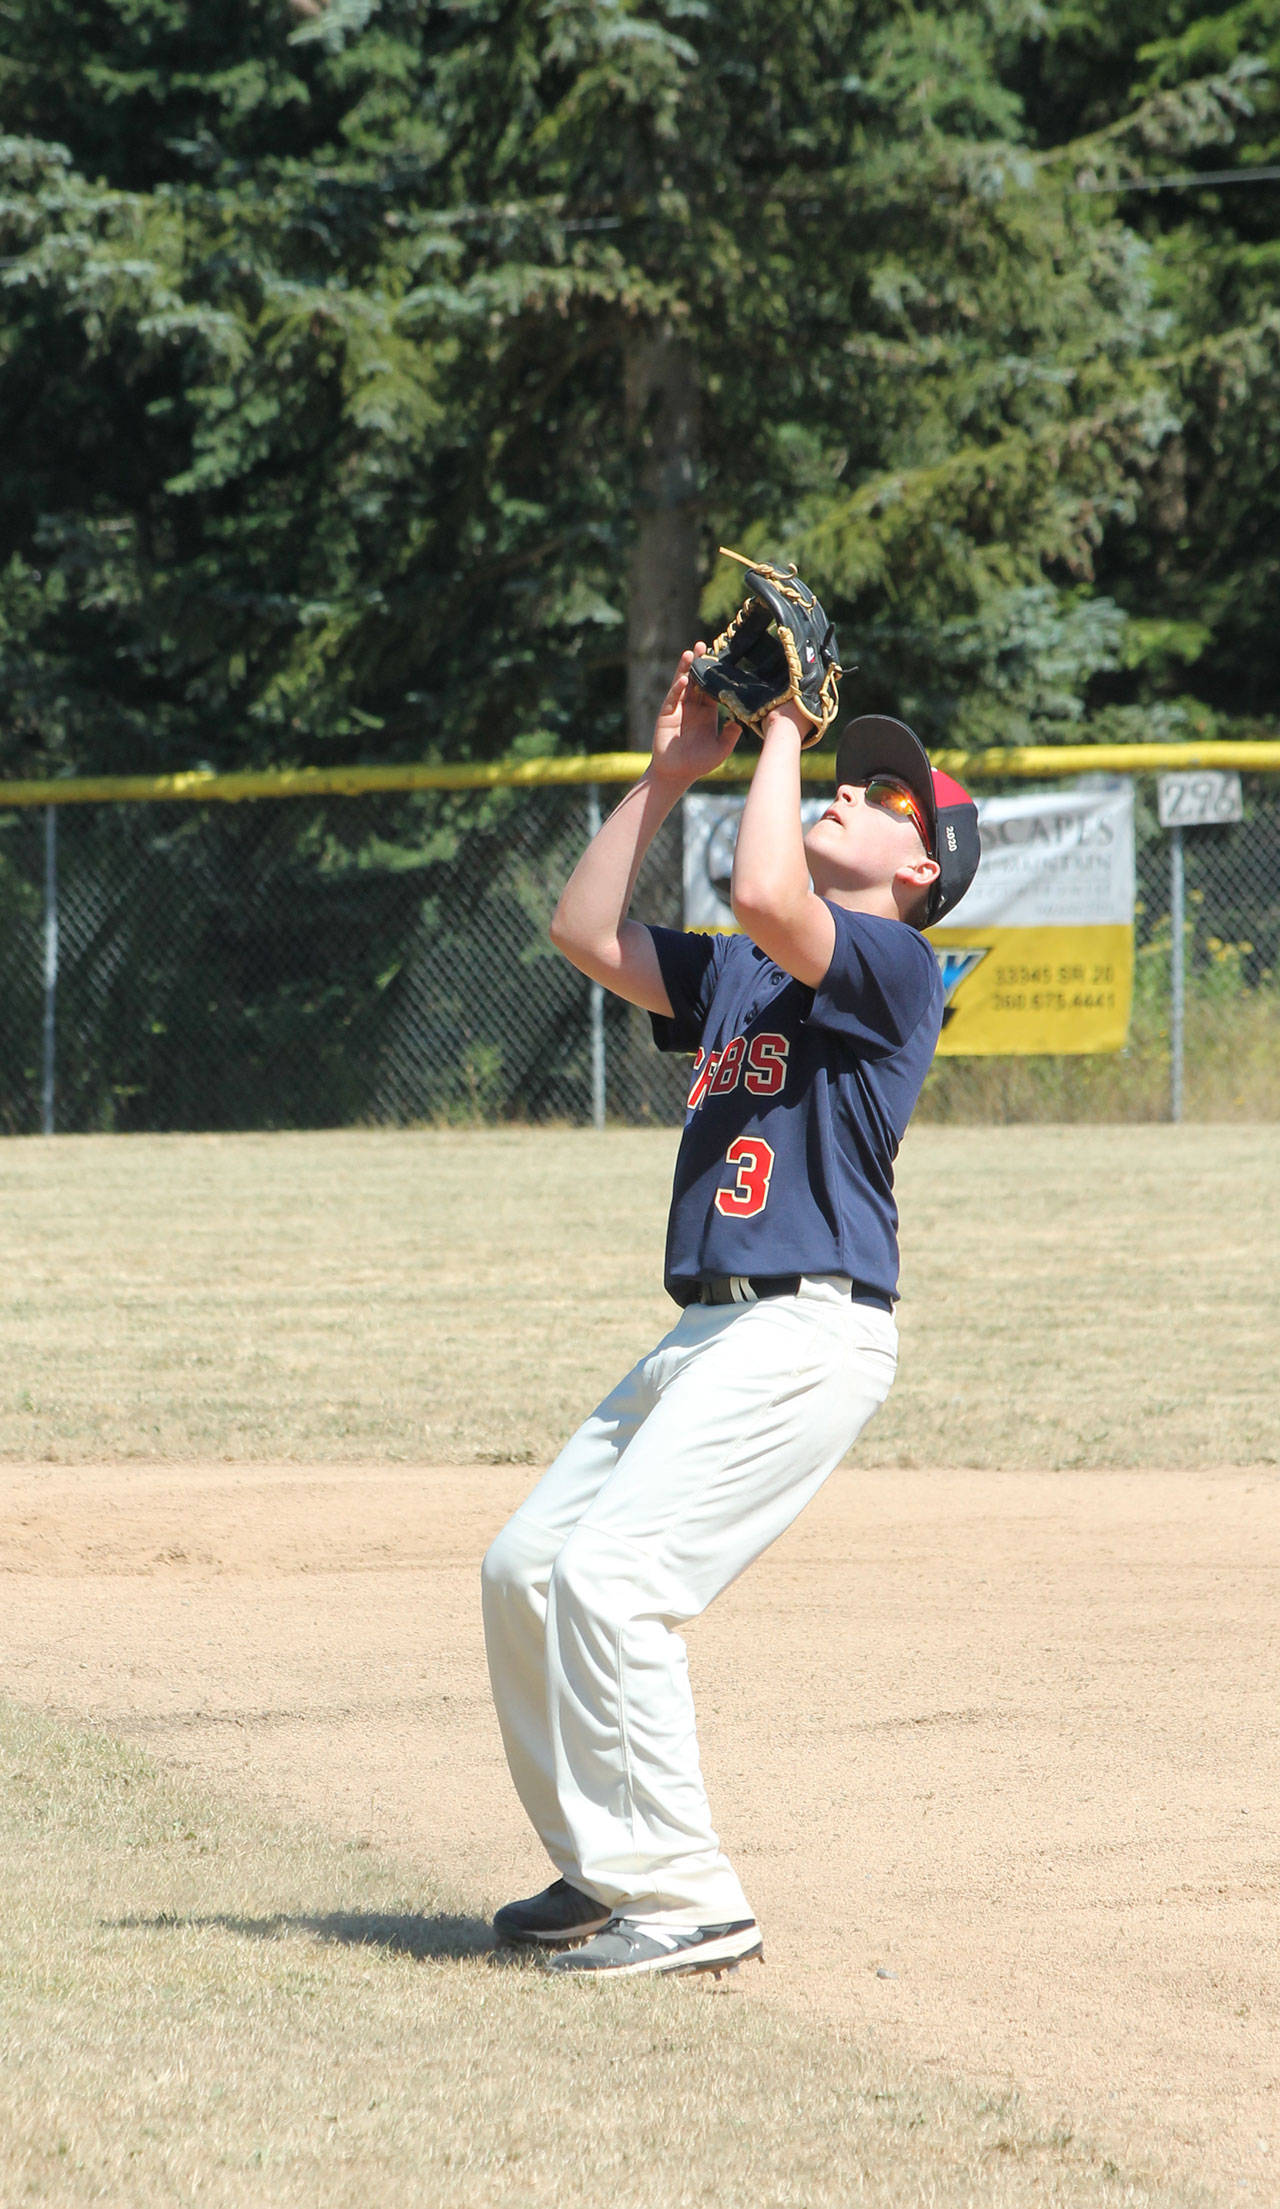 South Whidbey second baseman Liam Petty settles under a pop-up. (Photo by Jim Waller/South Whidbey Record)